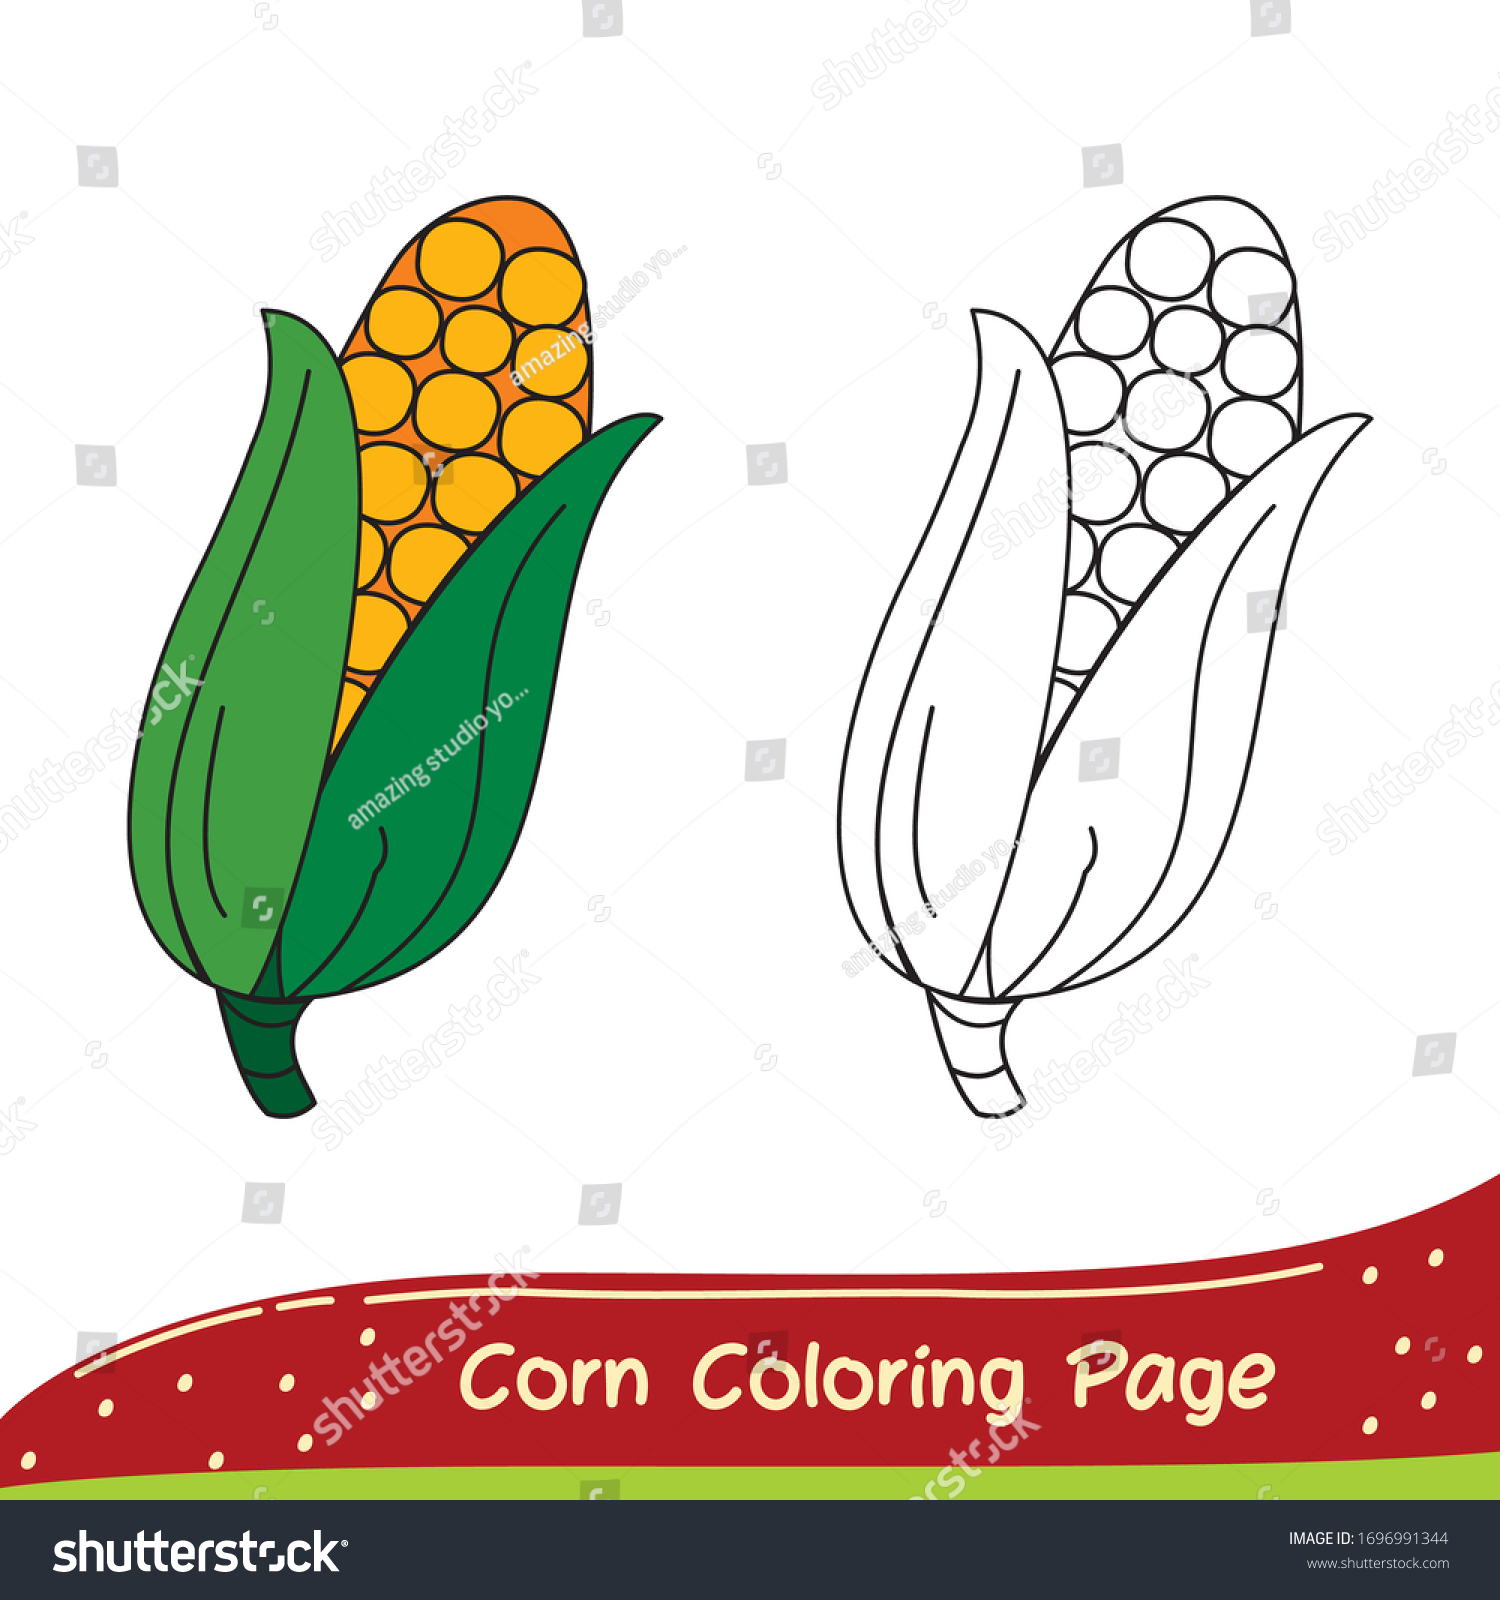 Corn Coloring Page Coloring Fruits Vegetables Stock Vector Royalty Free 1696991344